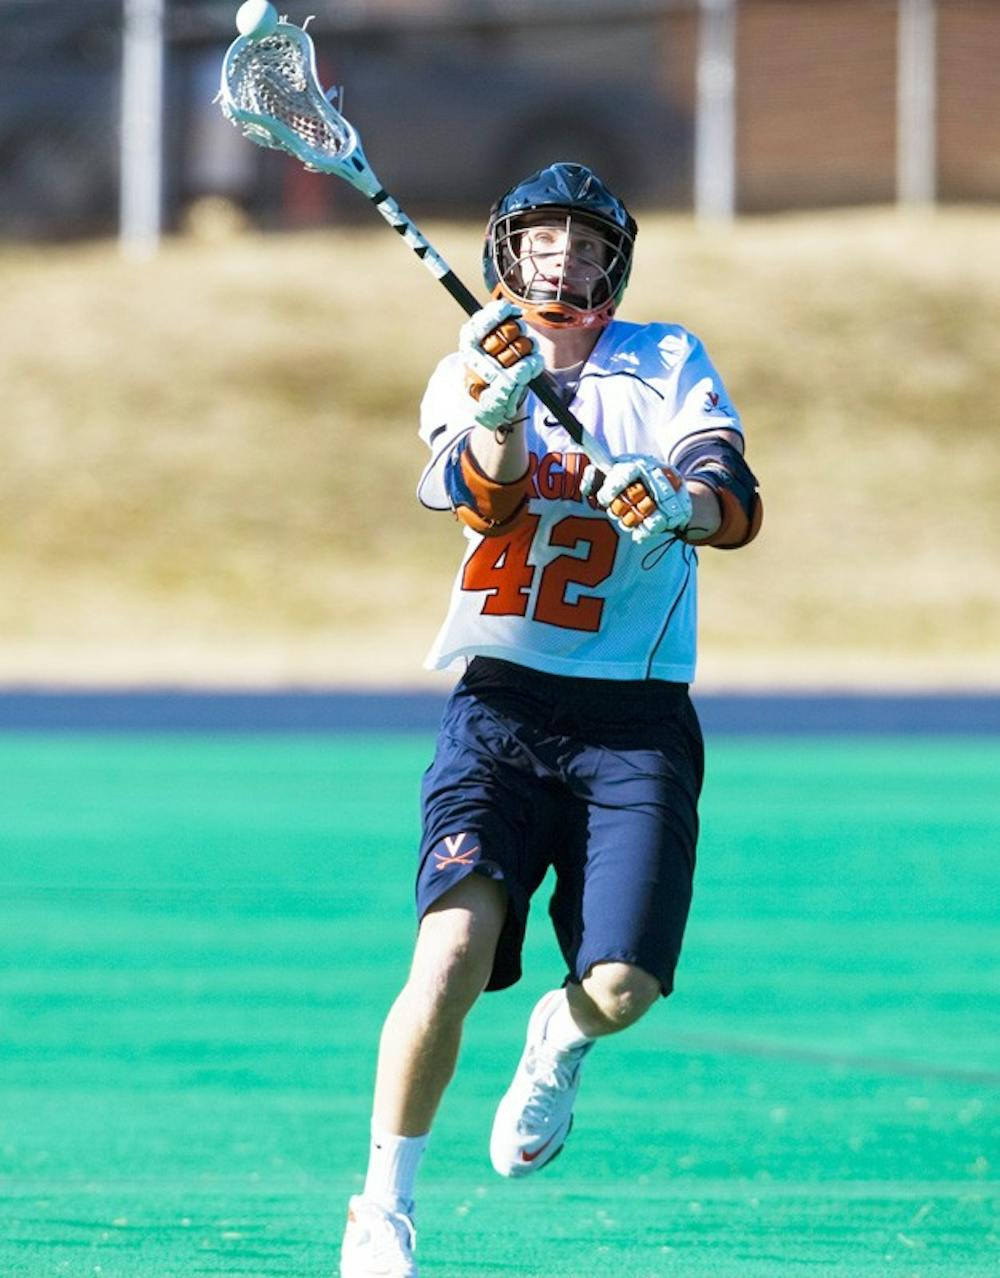 Virginia midfielder Max Pomper (42) in action against Navy.  The Virginia Cavaliers scrimmaged the Navy Midshipmen in lacrosse at the University Hall Turf Field  in Charlottesville, VA on February 2, 2008.